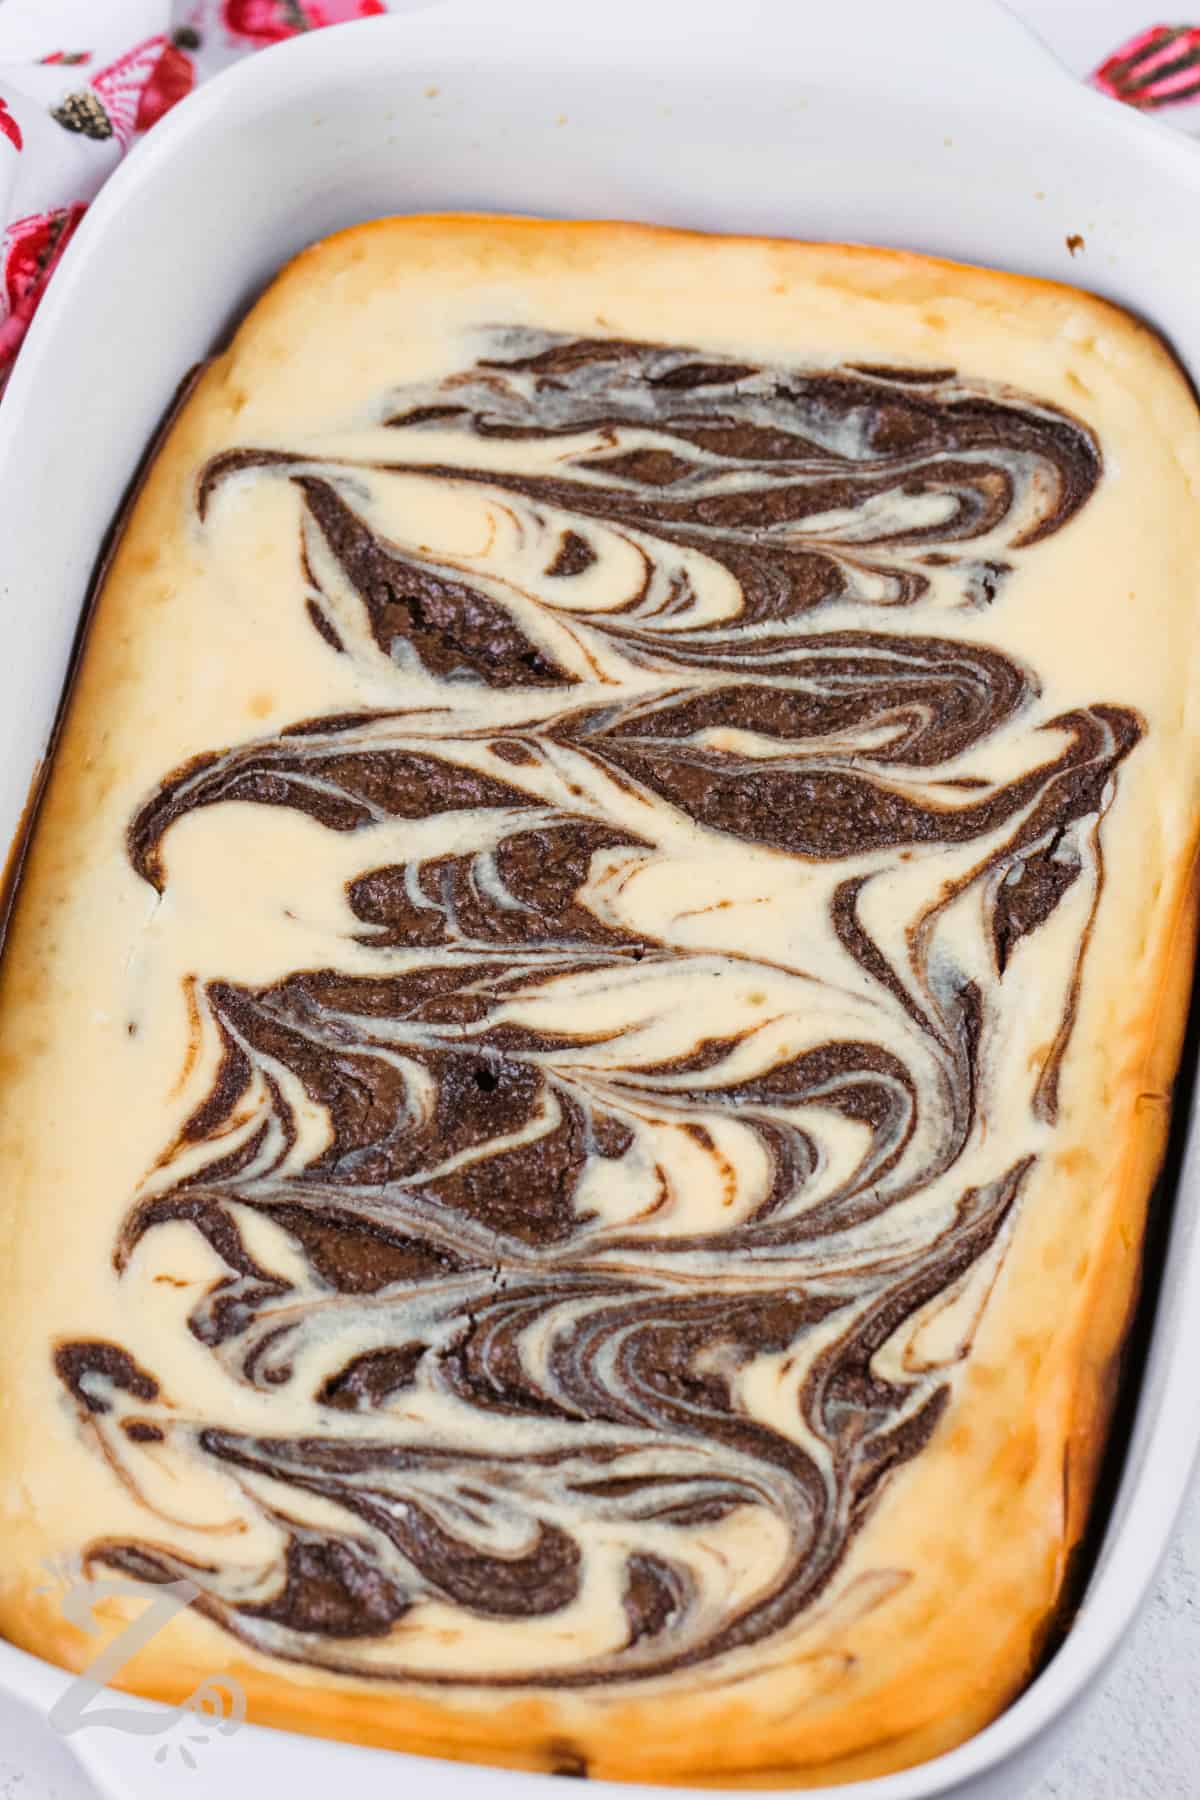 Cream Cheese Brownies baked in the dish